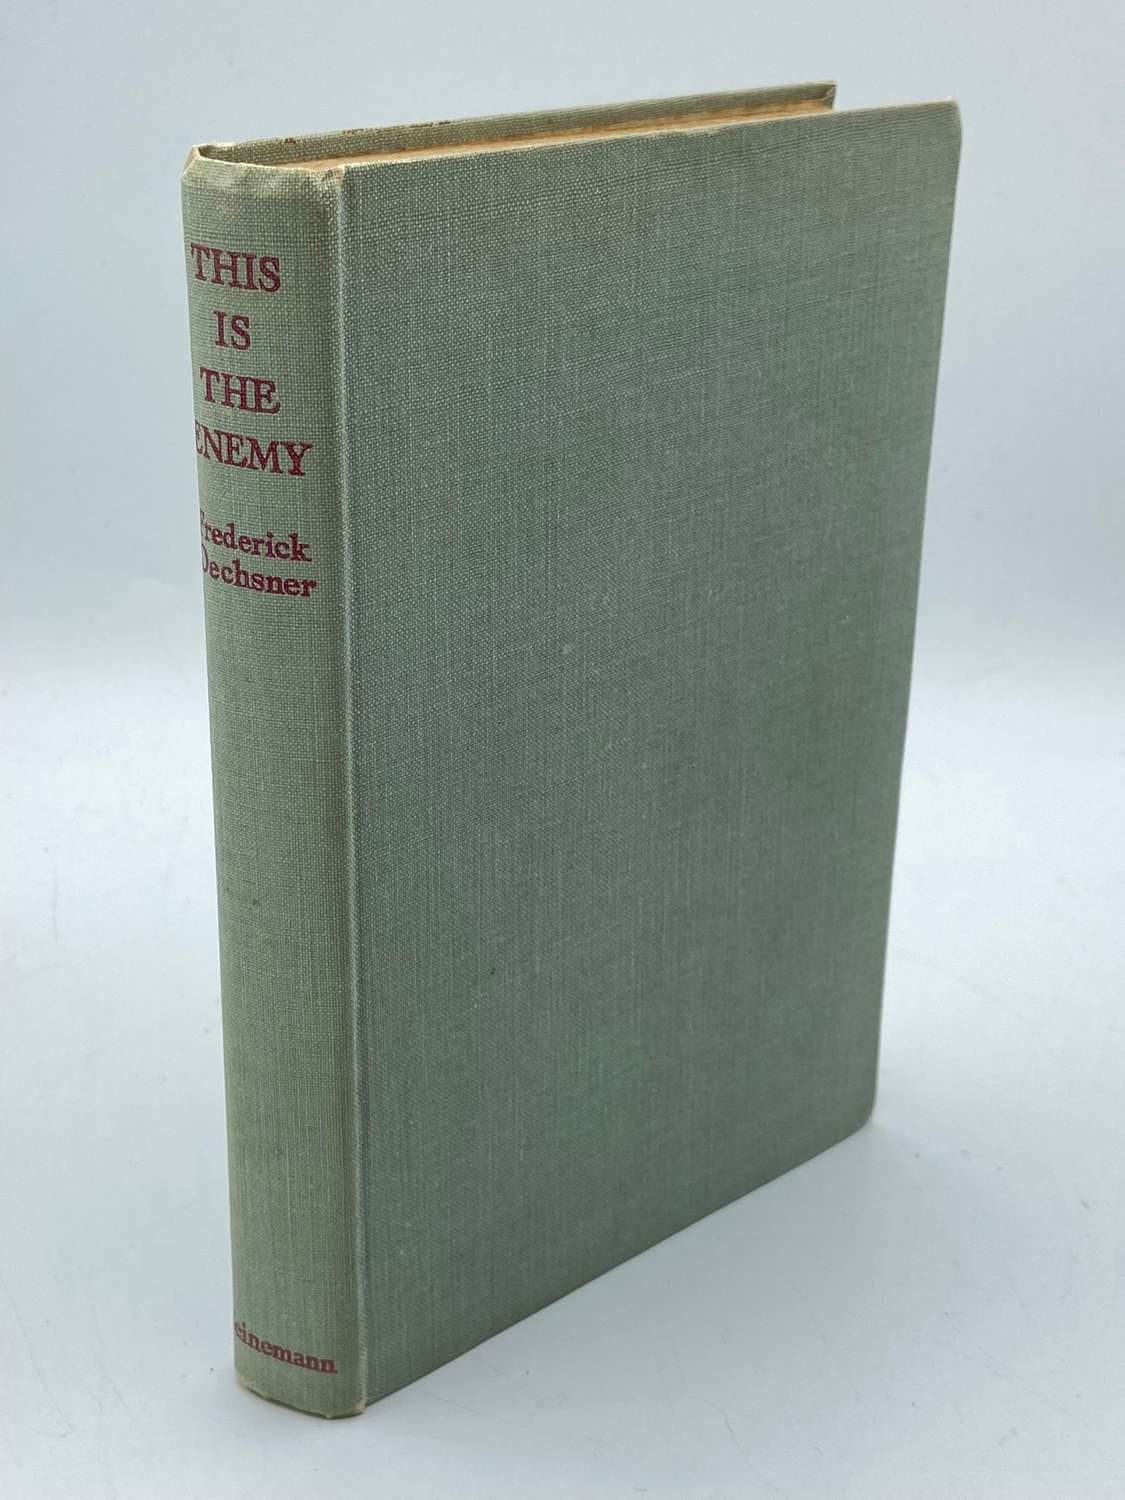 WW2 This Is the Enemy By Frederick Oechsner Published 1942